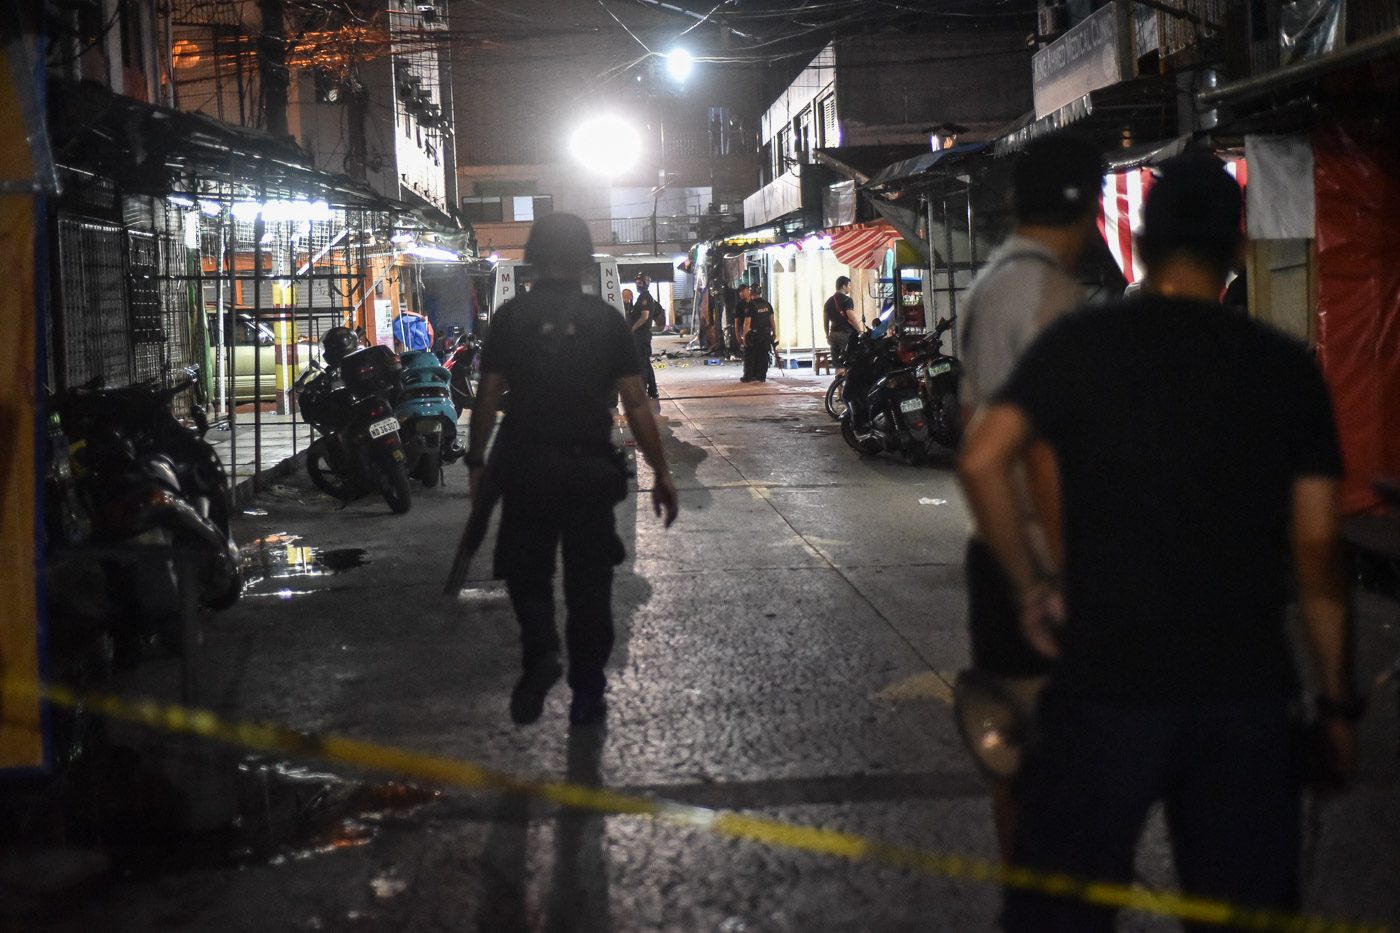 TWIN EXPLOSIONS. Explosions rock Quiapo near the Islamic Center on May 6, 2017. The first explosion took place around 6pm killing 2 people. Two hours later, another explosion took place at the exact spot just as the police and SOCO are wrapping up their investigation. Photo by LeAnne Jazul/Rappler 